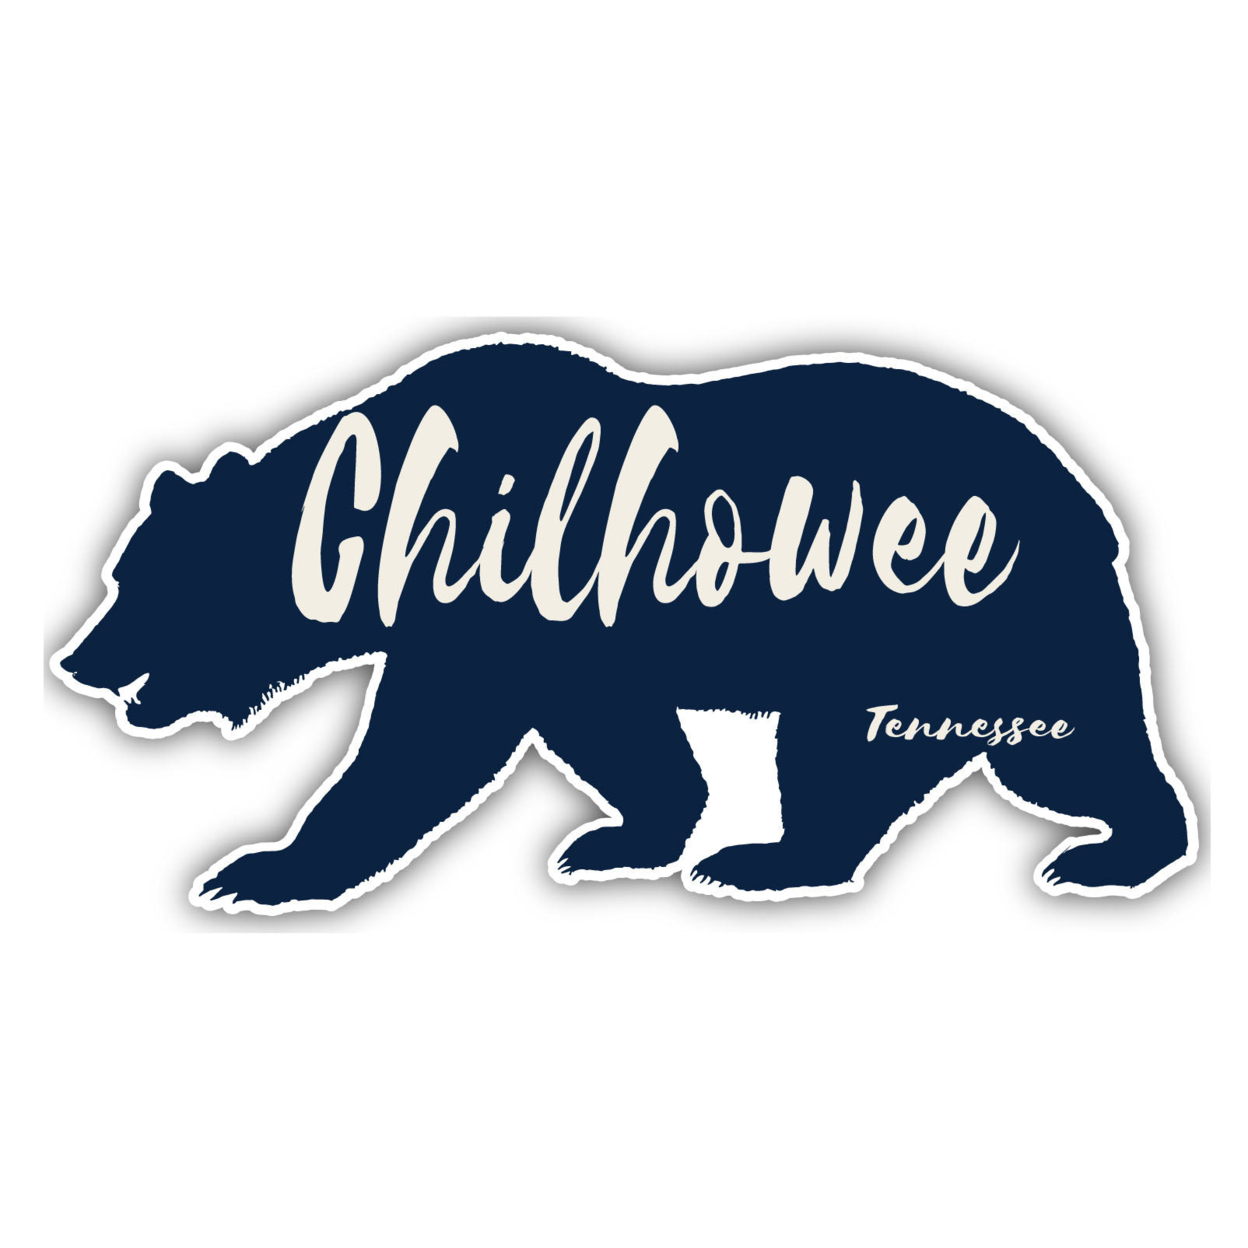 Chilhowee Tennessee Souvenir Decorative Stickers (Choose Theme And Size) - Single Unit, 8-Inch, Bear